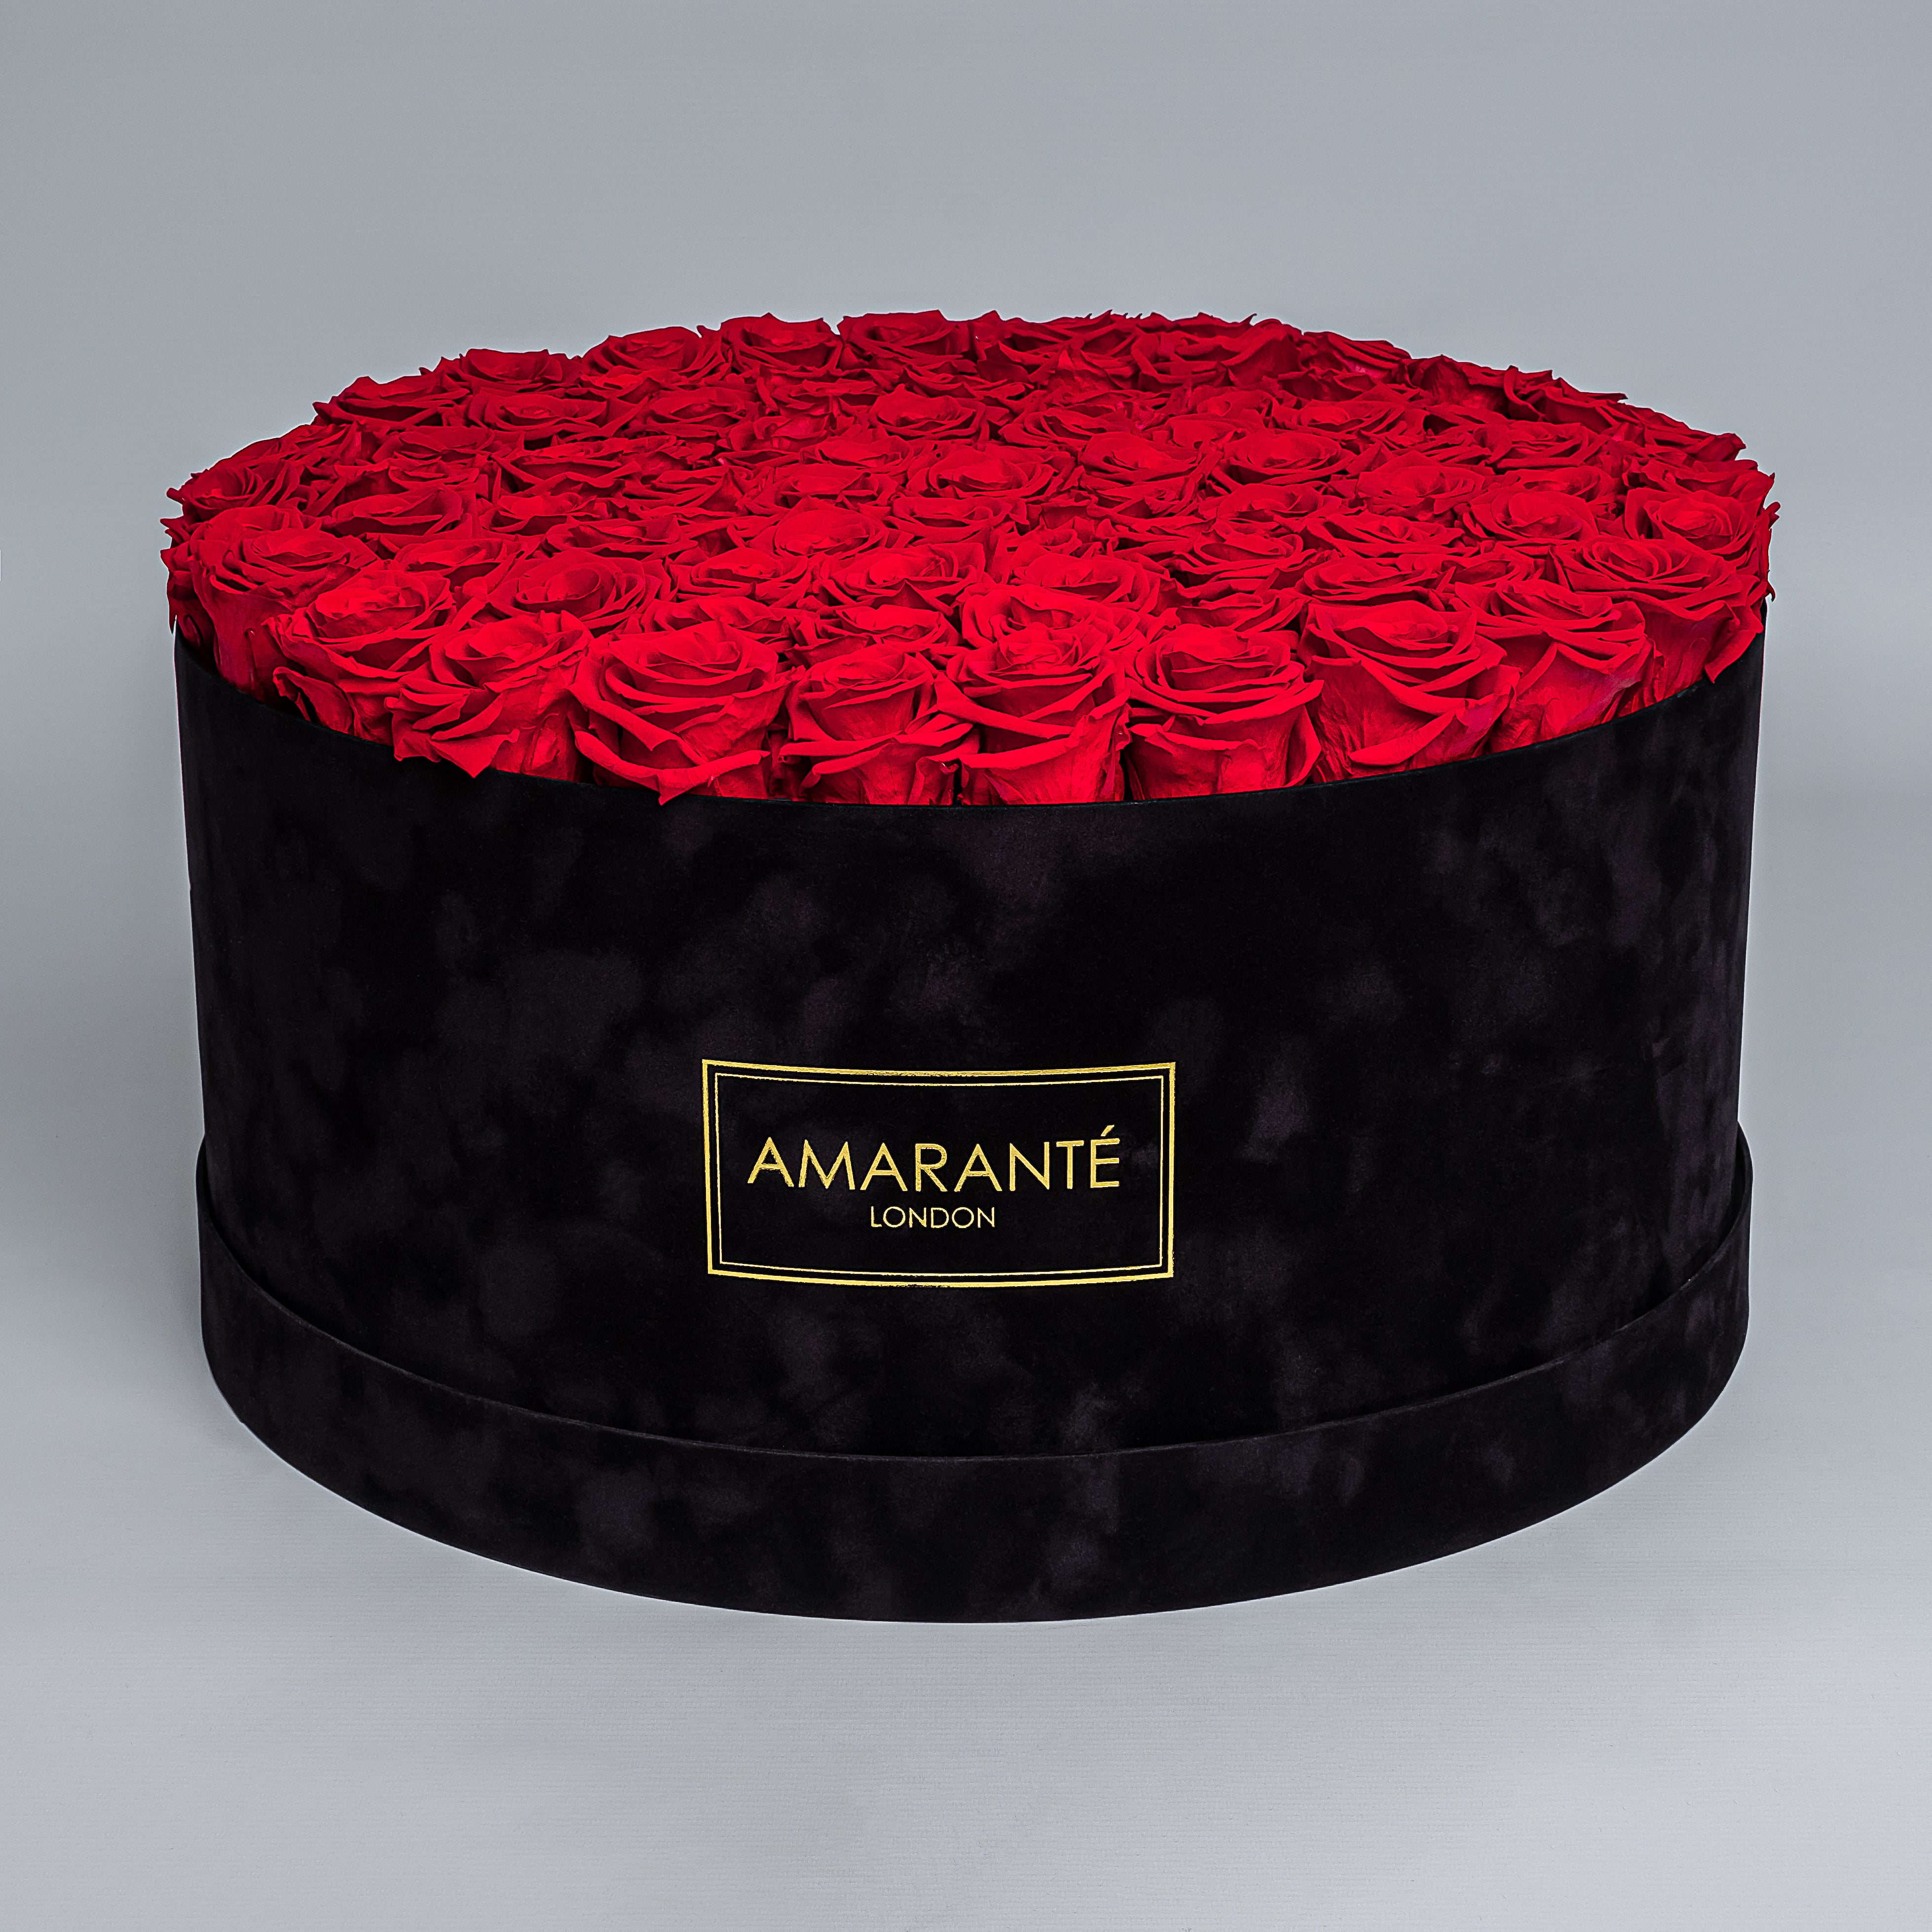 Mesmerising bouquet of 100 light red infinity roses nestled in a black round rose box with delicate suede finish. Exquisite gift for showing timeless love and affection. FreeUK Delivery.